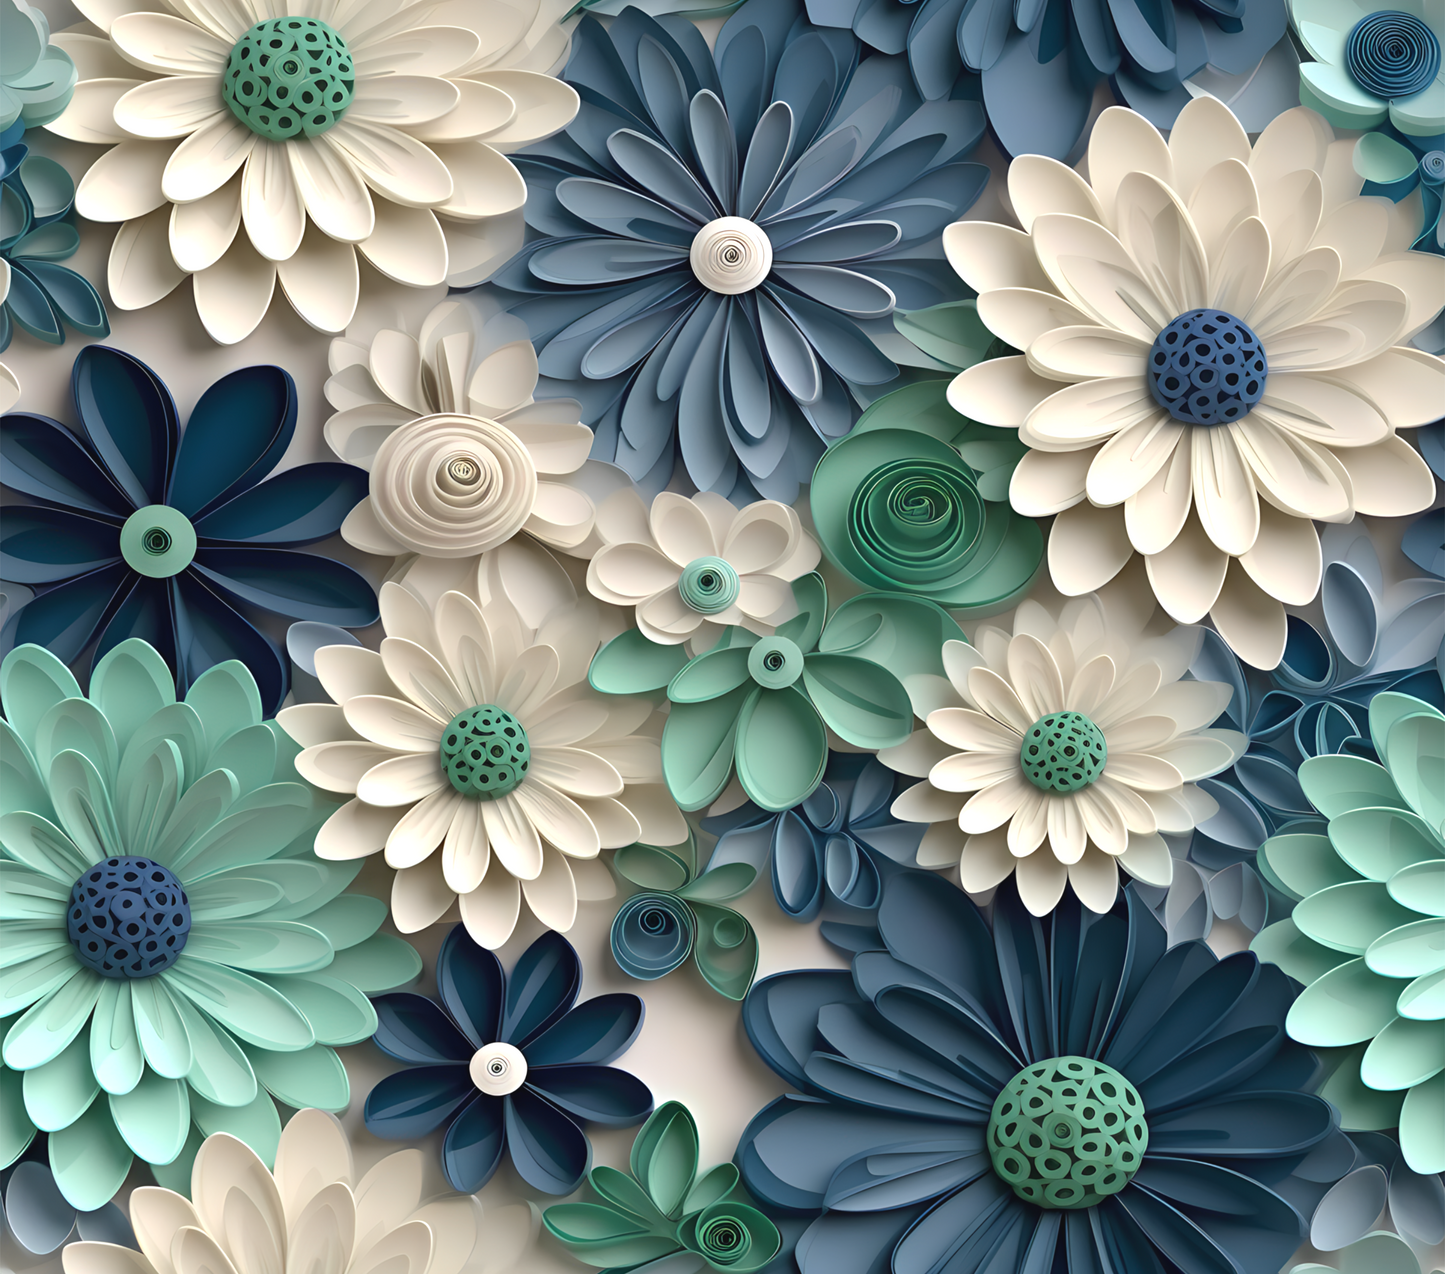 3D BLUE AND GREEN FLORAL